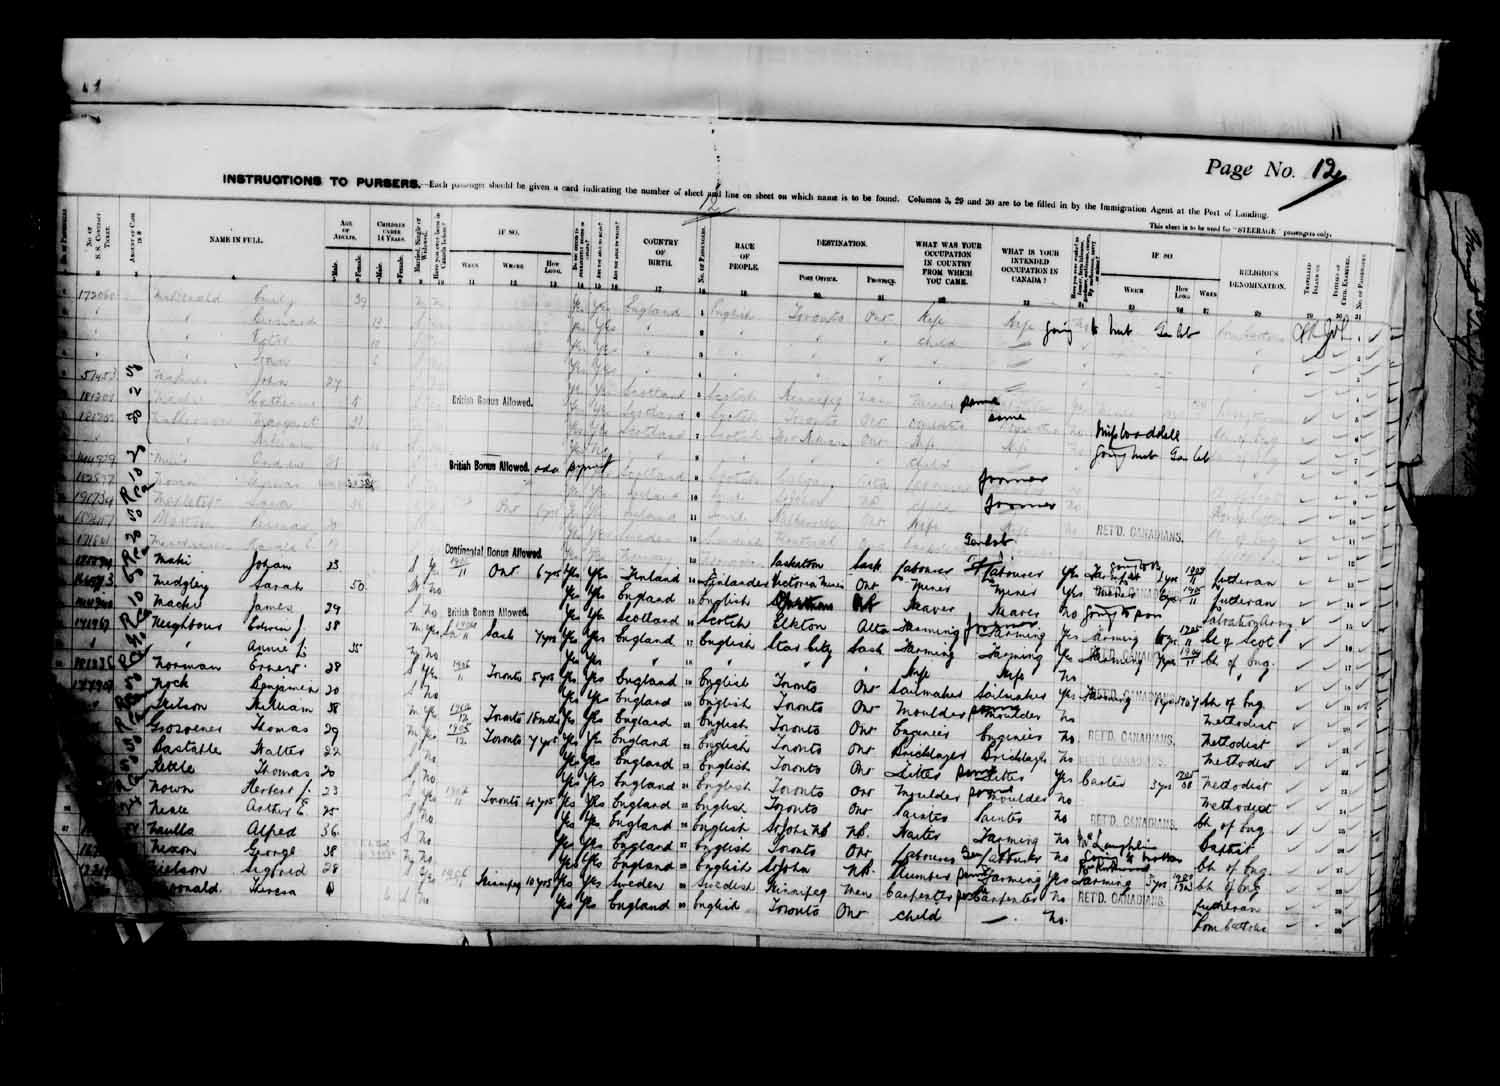 Digitized page of Passenger Lists for Image No.: e003627199